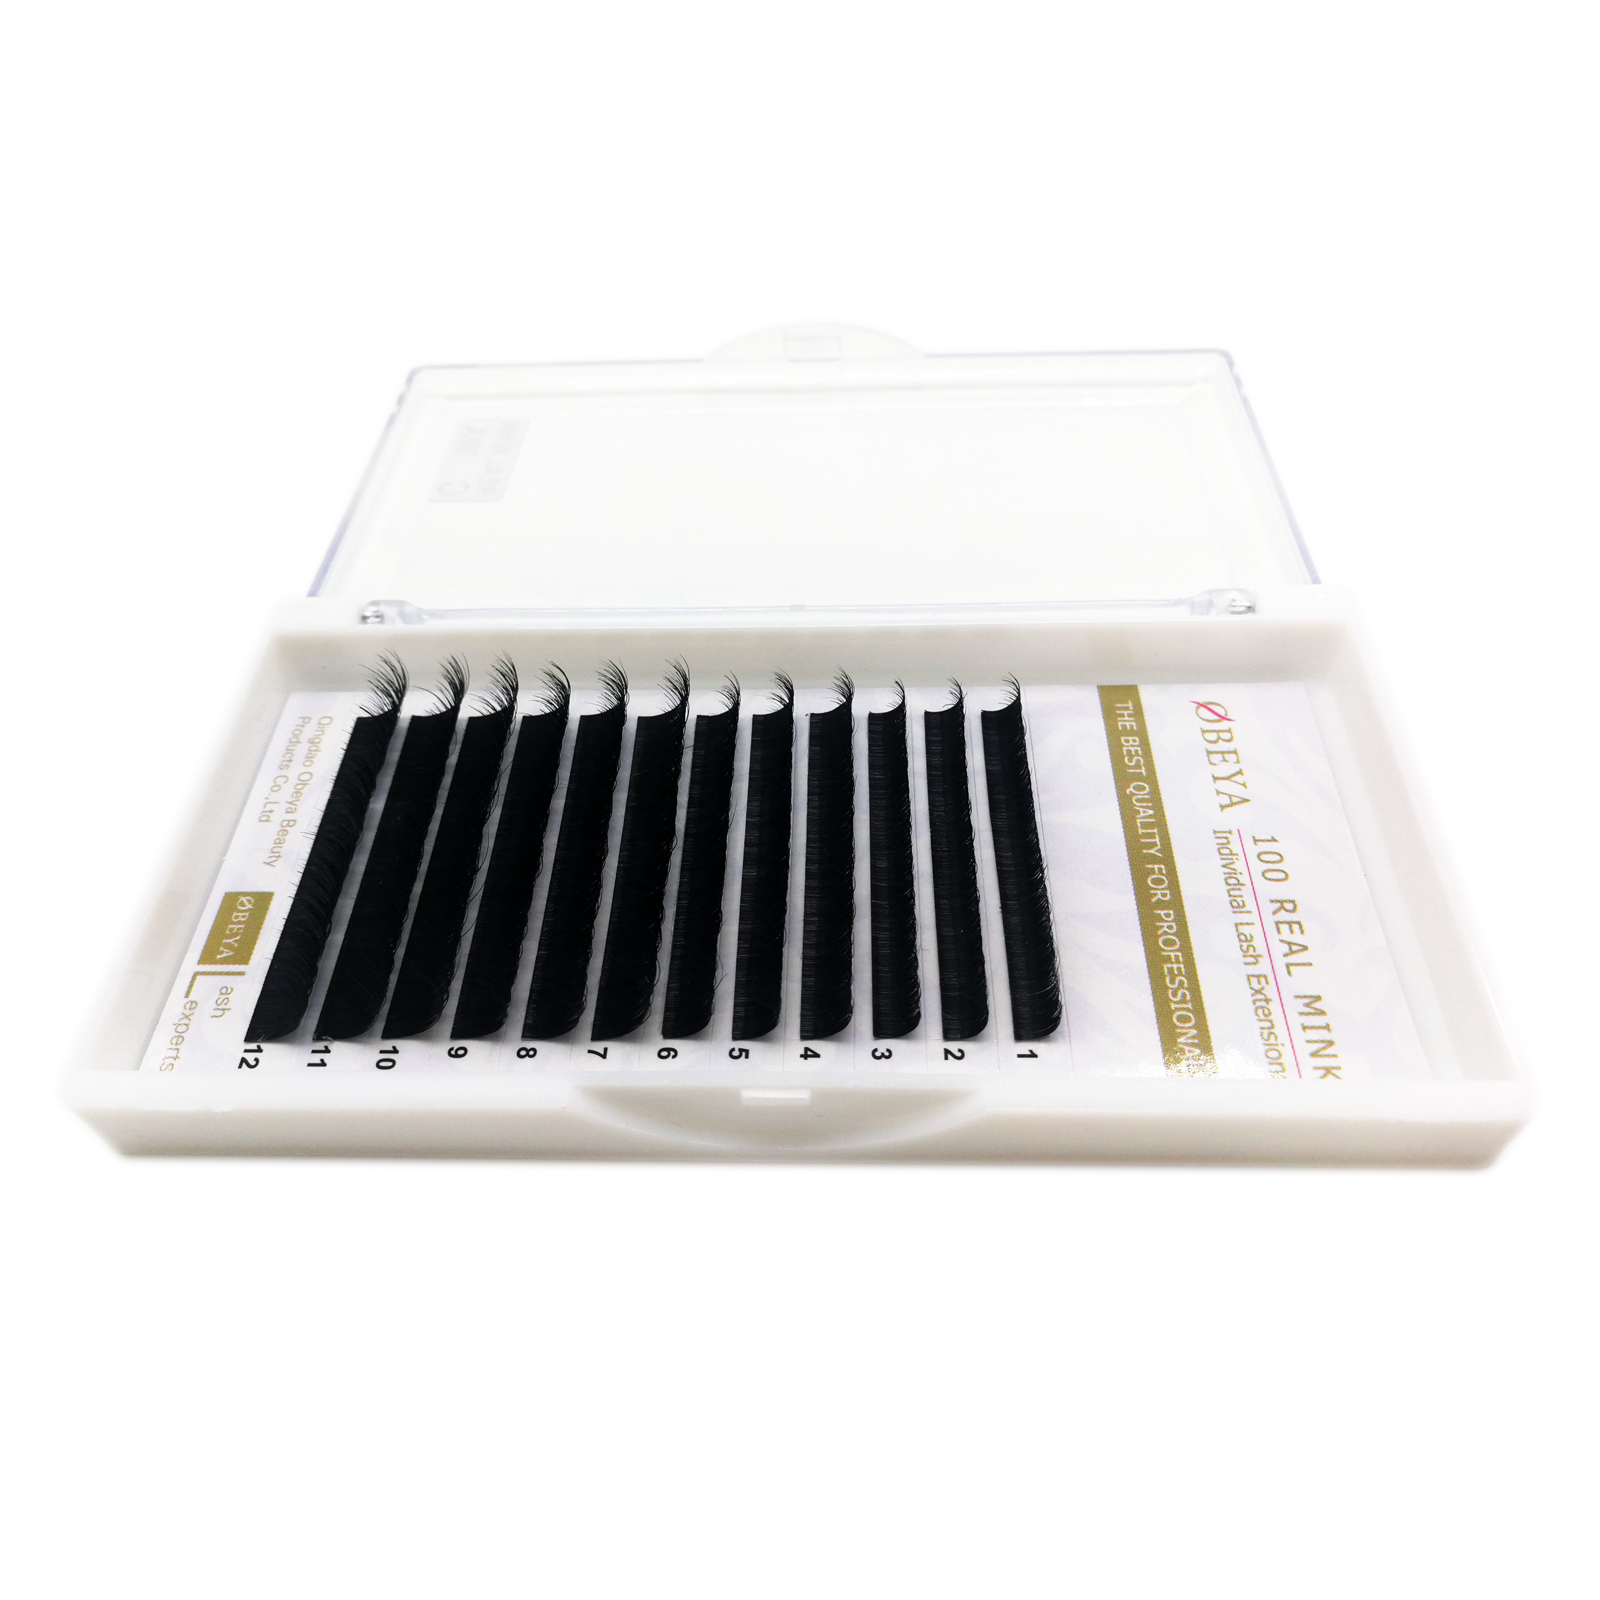 ODM OEM accepted C D Curl 100% real mink volume eyelash extensions YY